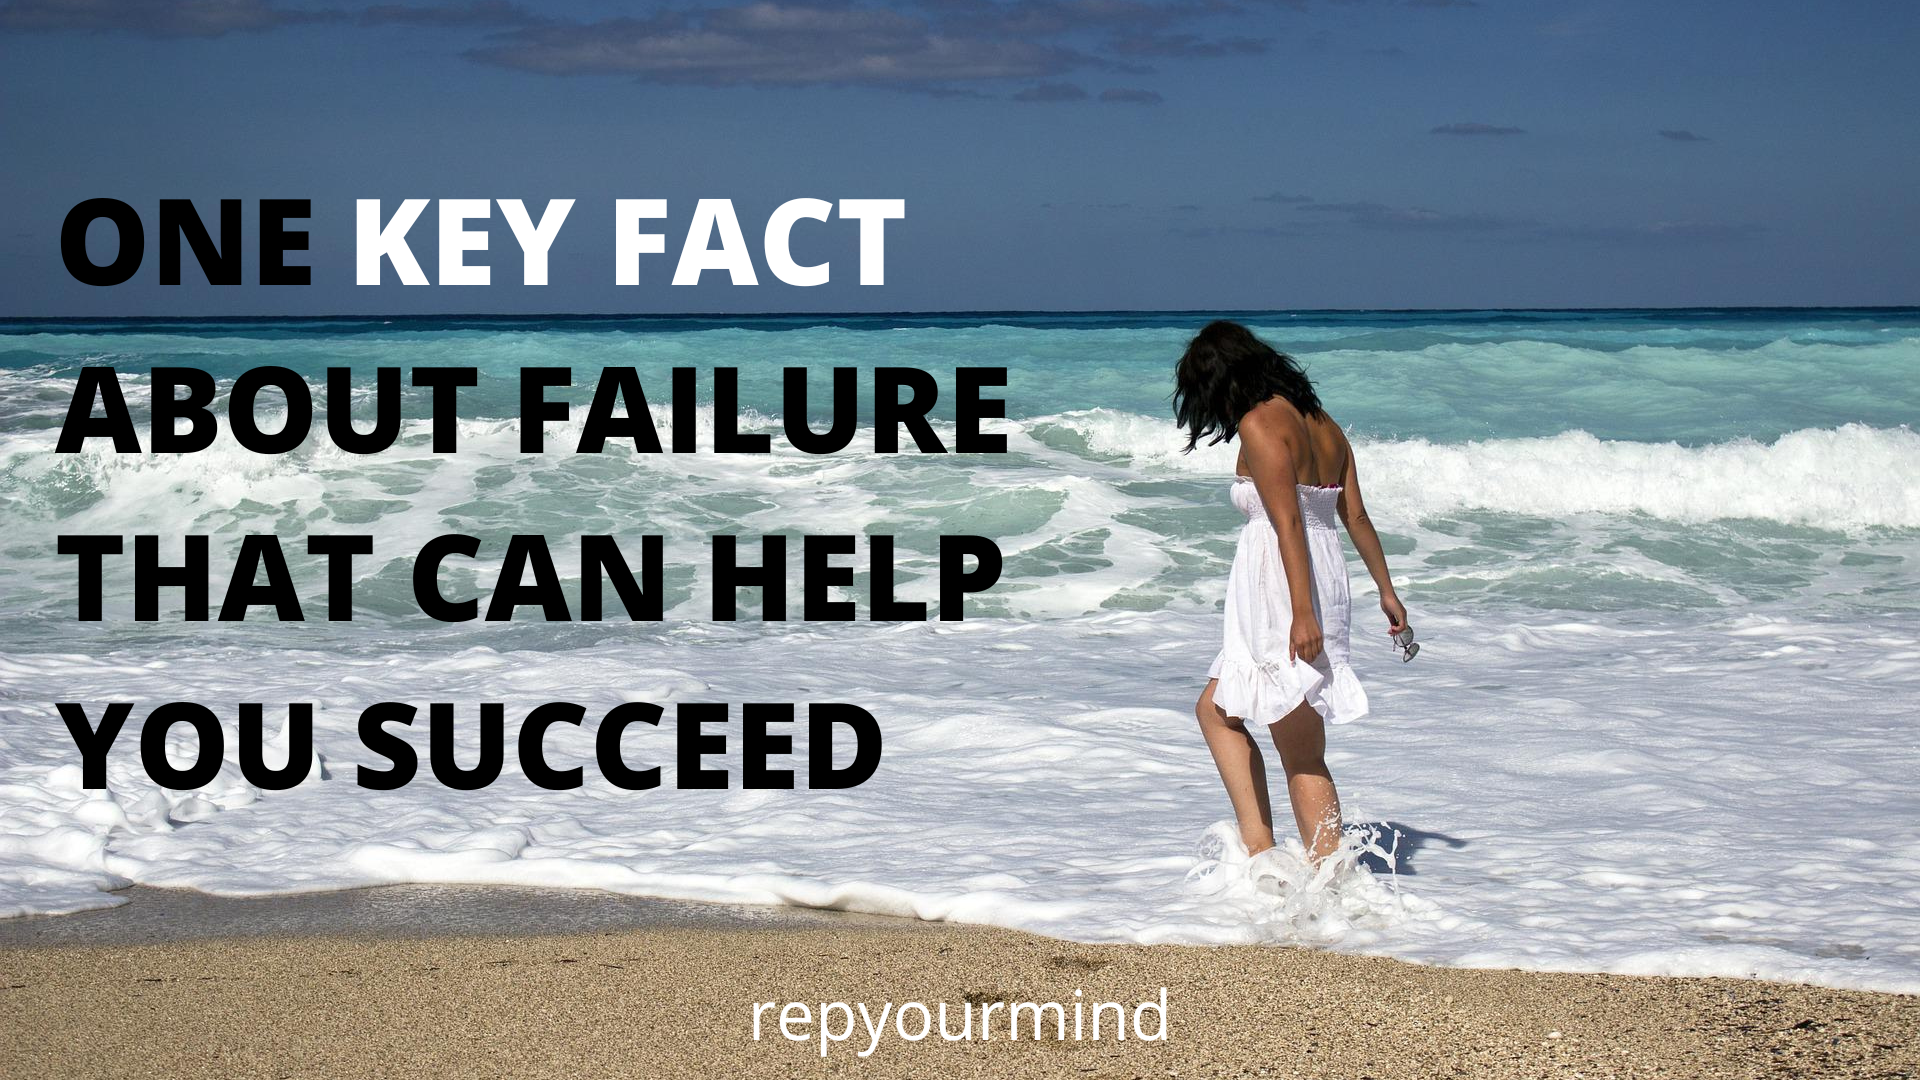 One Key Fact about Failure That Can Help You Succeed